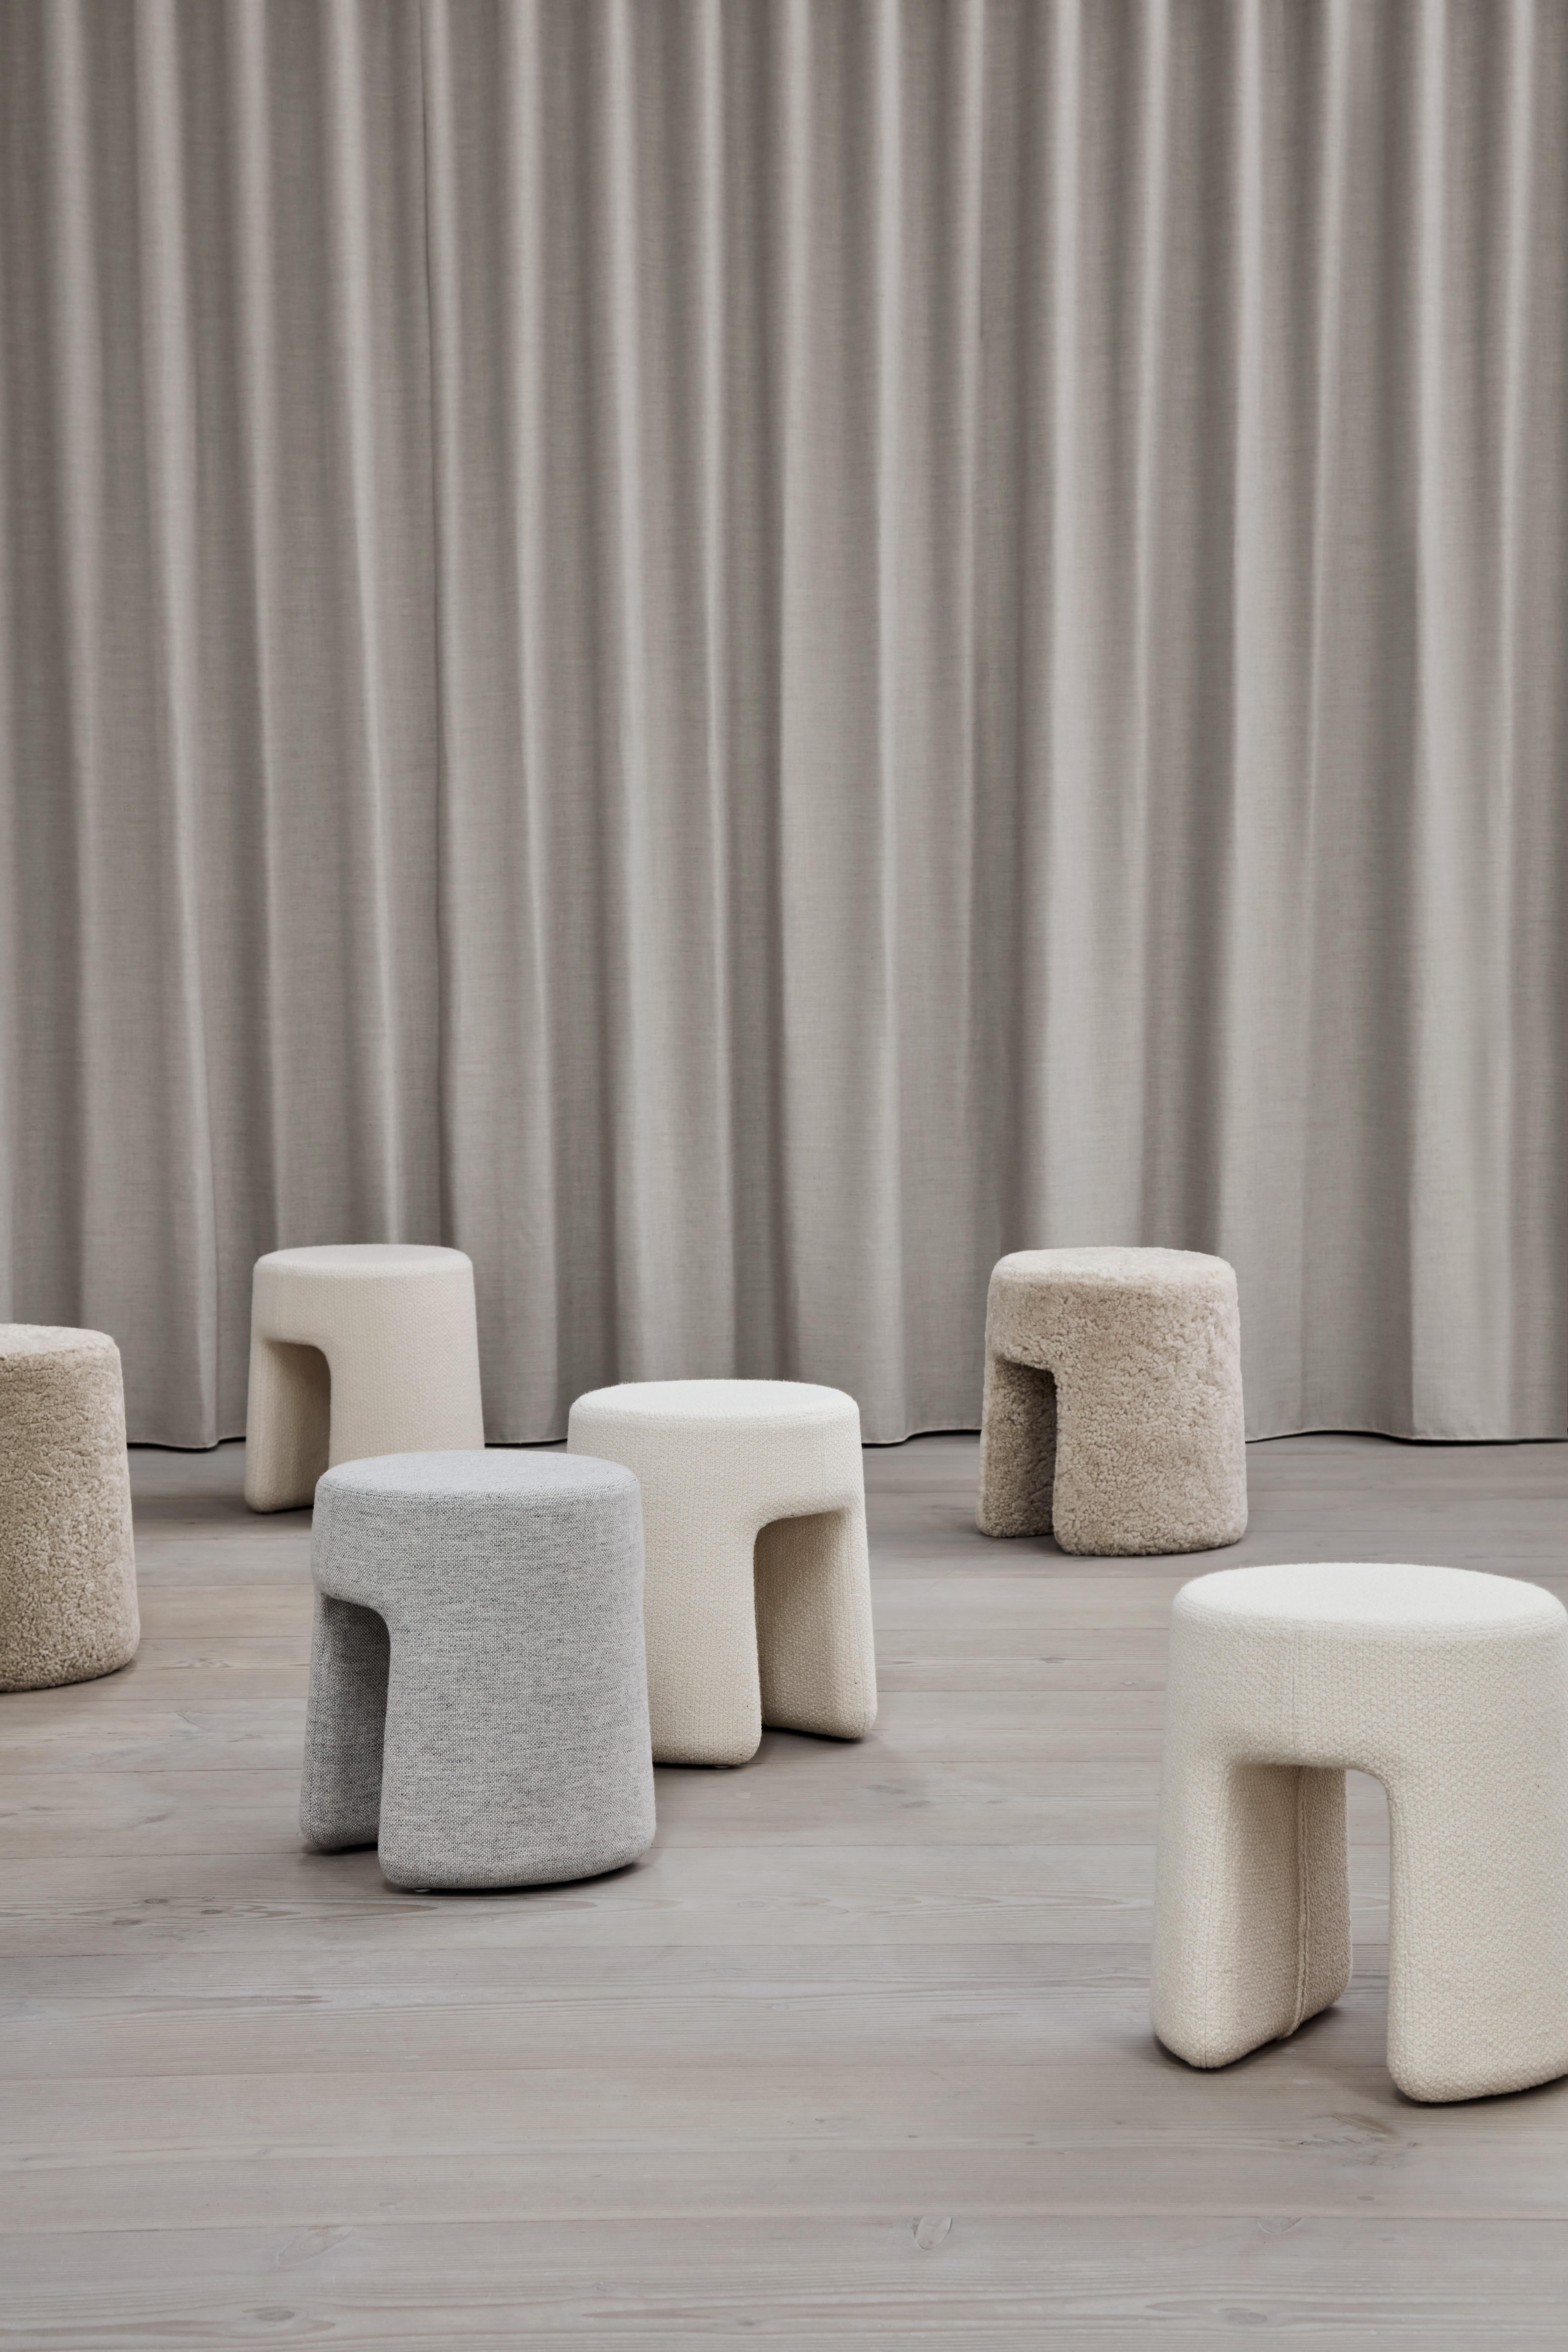 Fabric Sequoia Pouf, Hallingdal 65-110, by Space Copenhagen for Fredericia For Sale